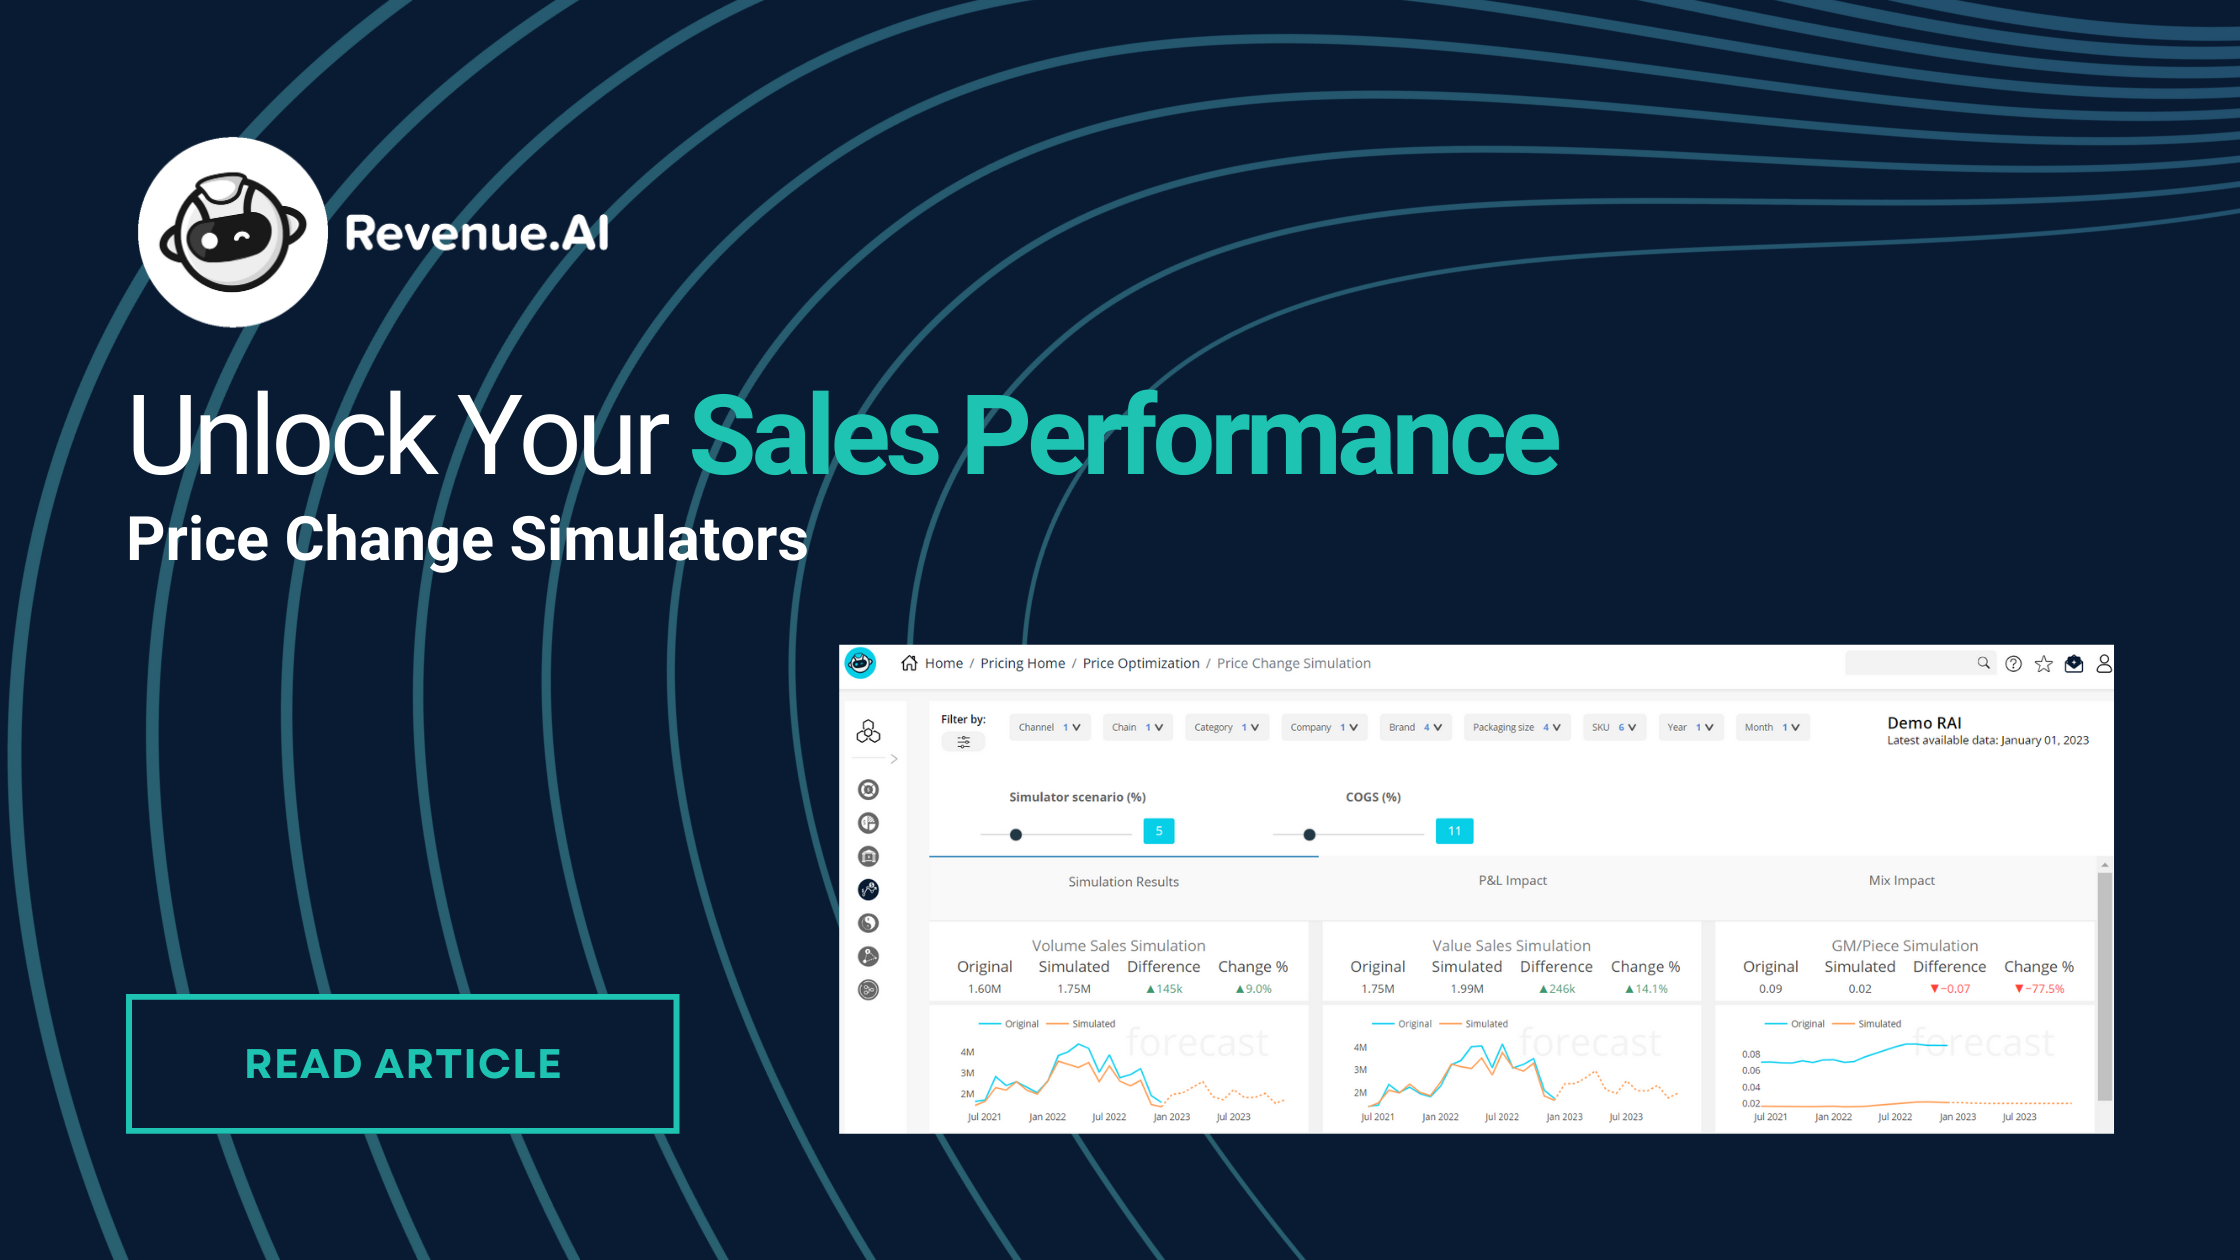 Unlock Your Sales Performance with Price Simulators